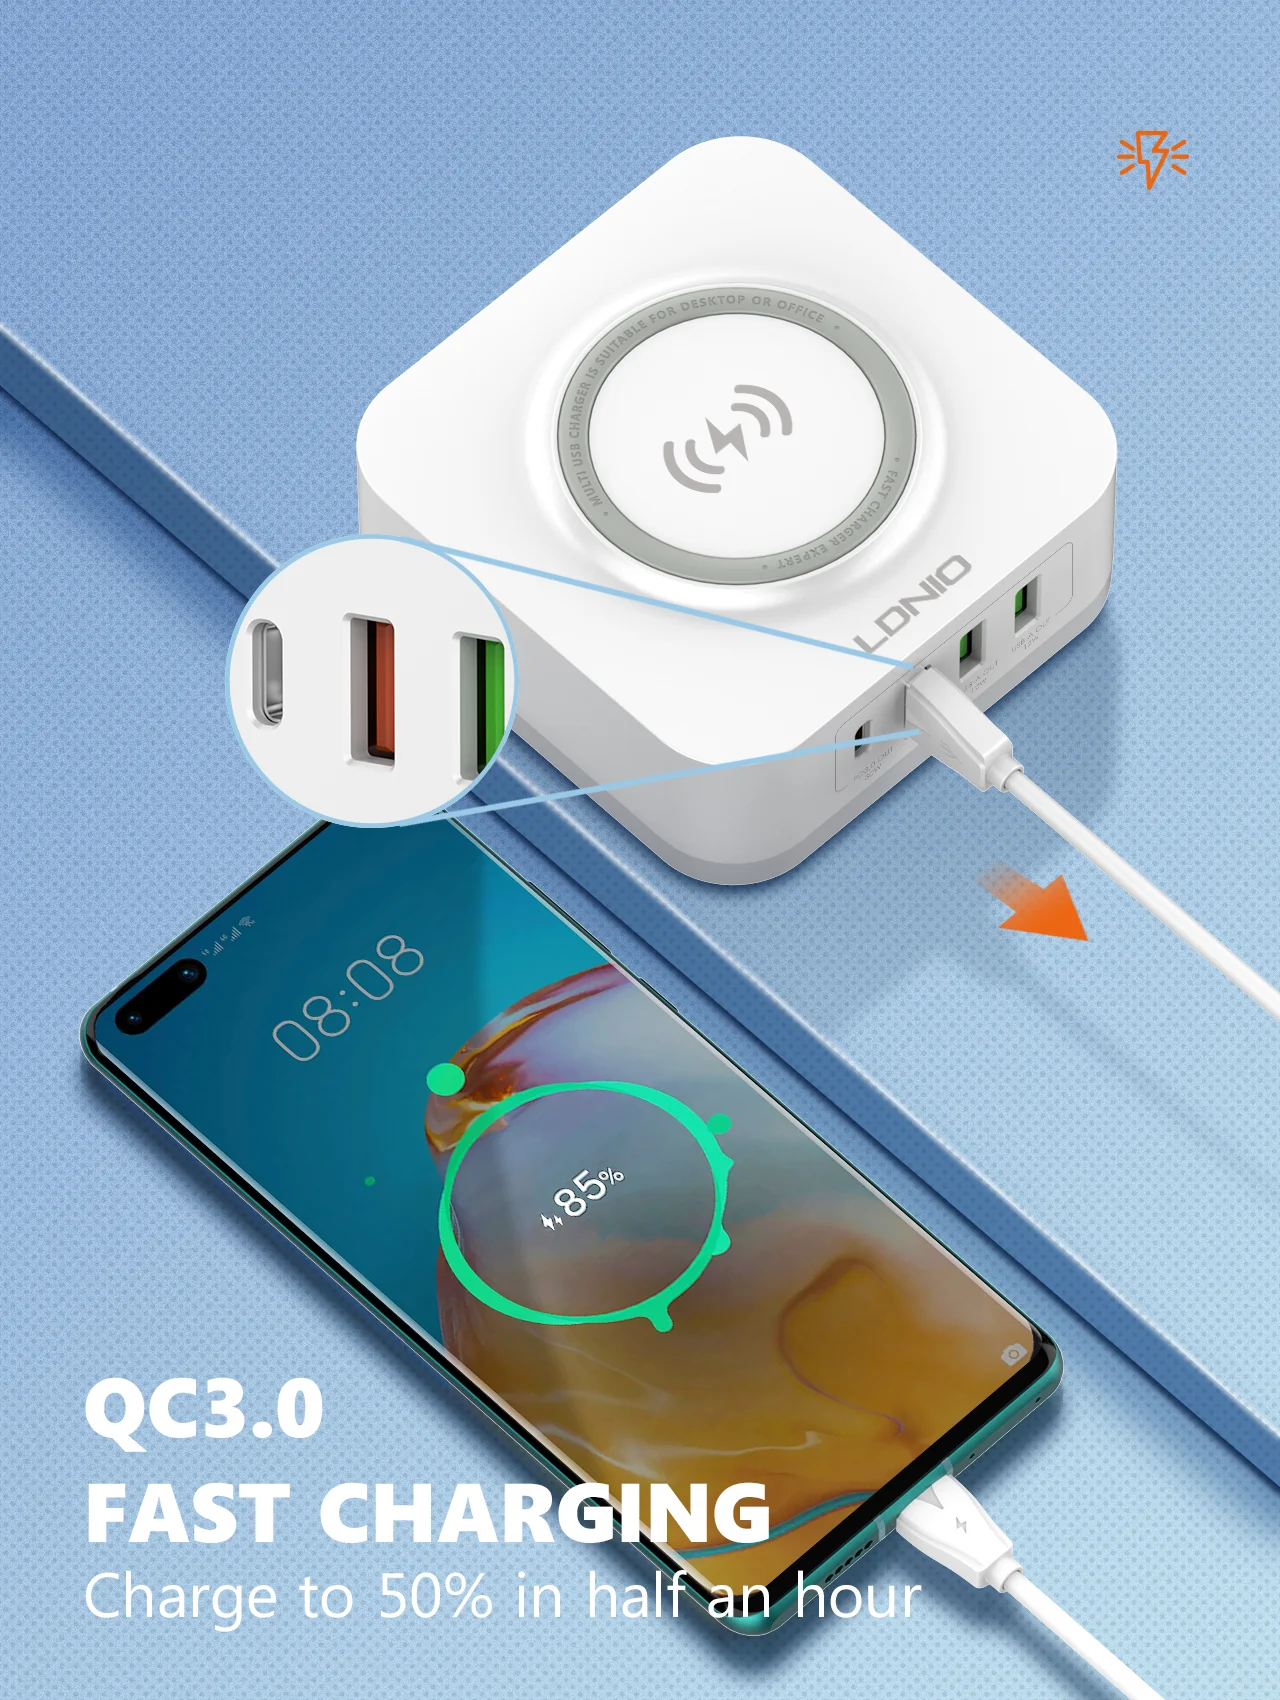 Buy LDNIO AW004 32W Desktop Wireless Charger Price In Pakistan available on techmac.pk we offer fast home delivery all over nationwide.